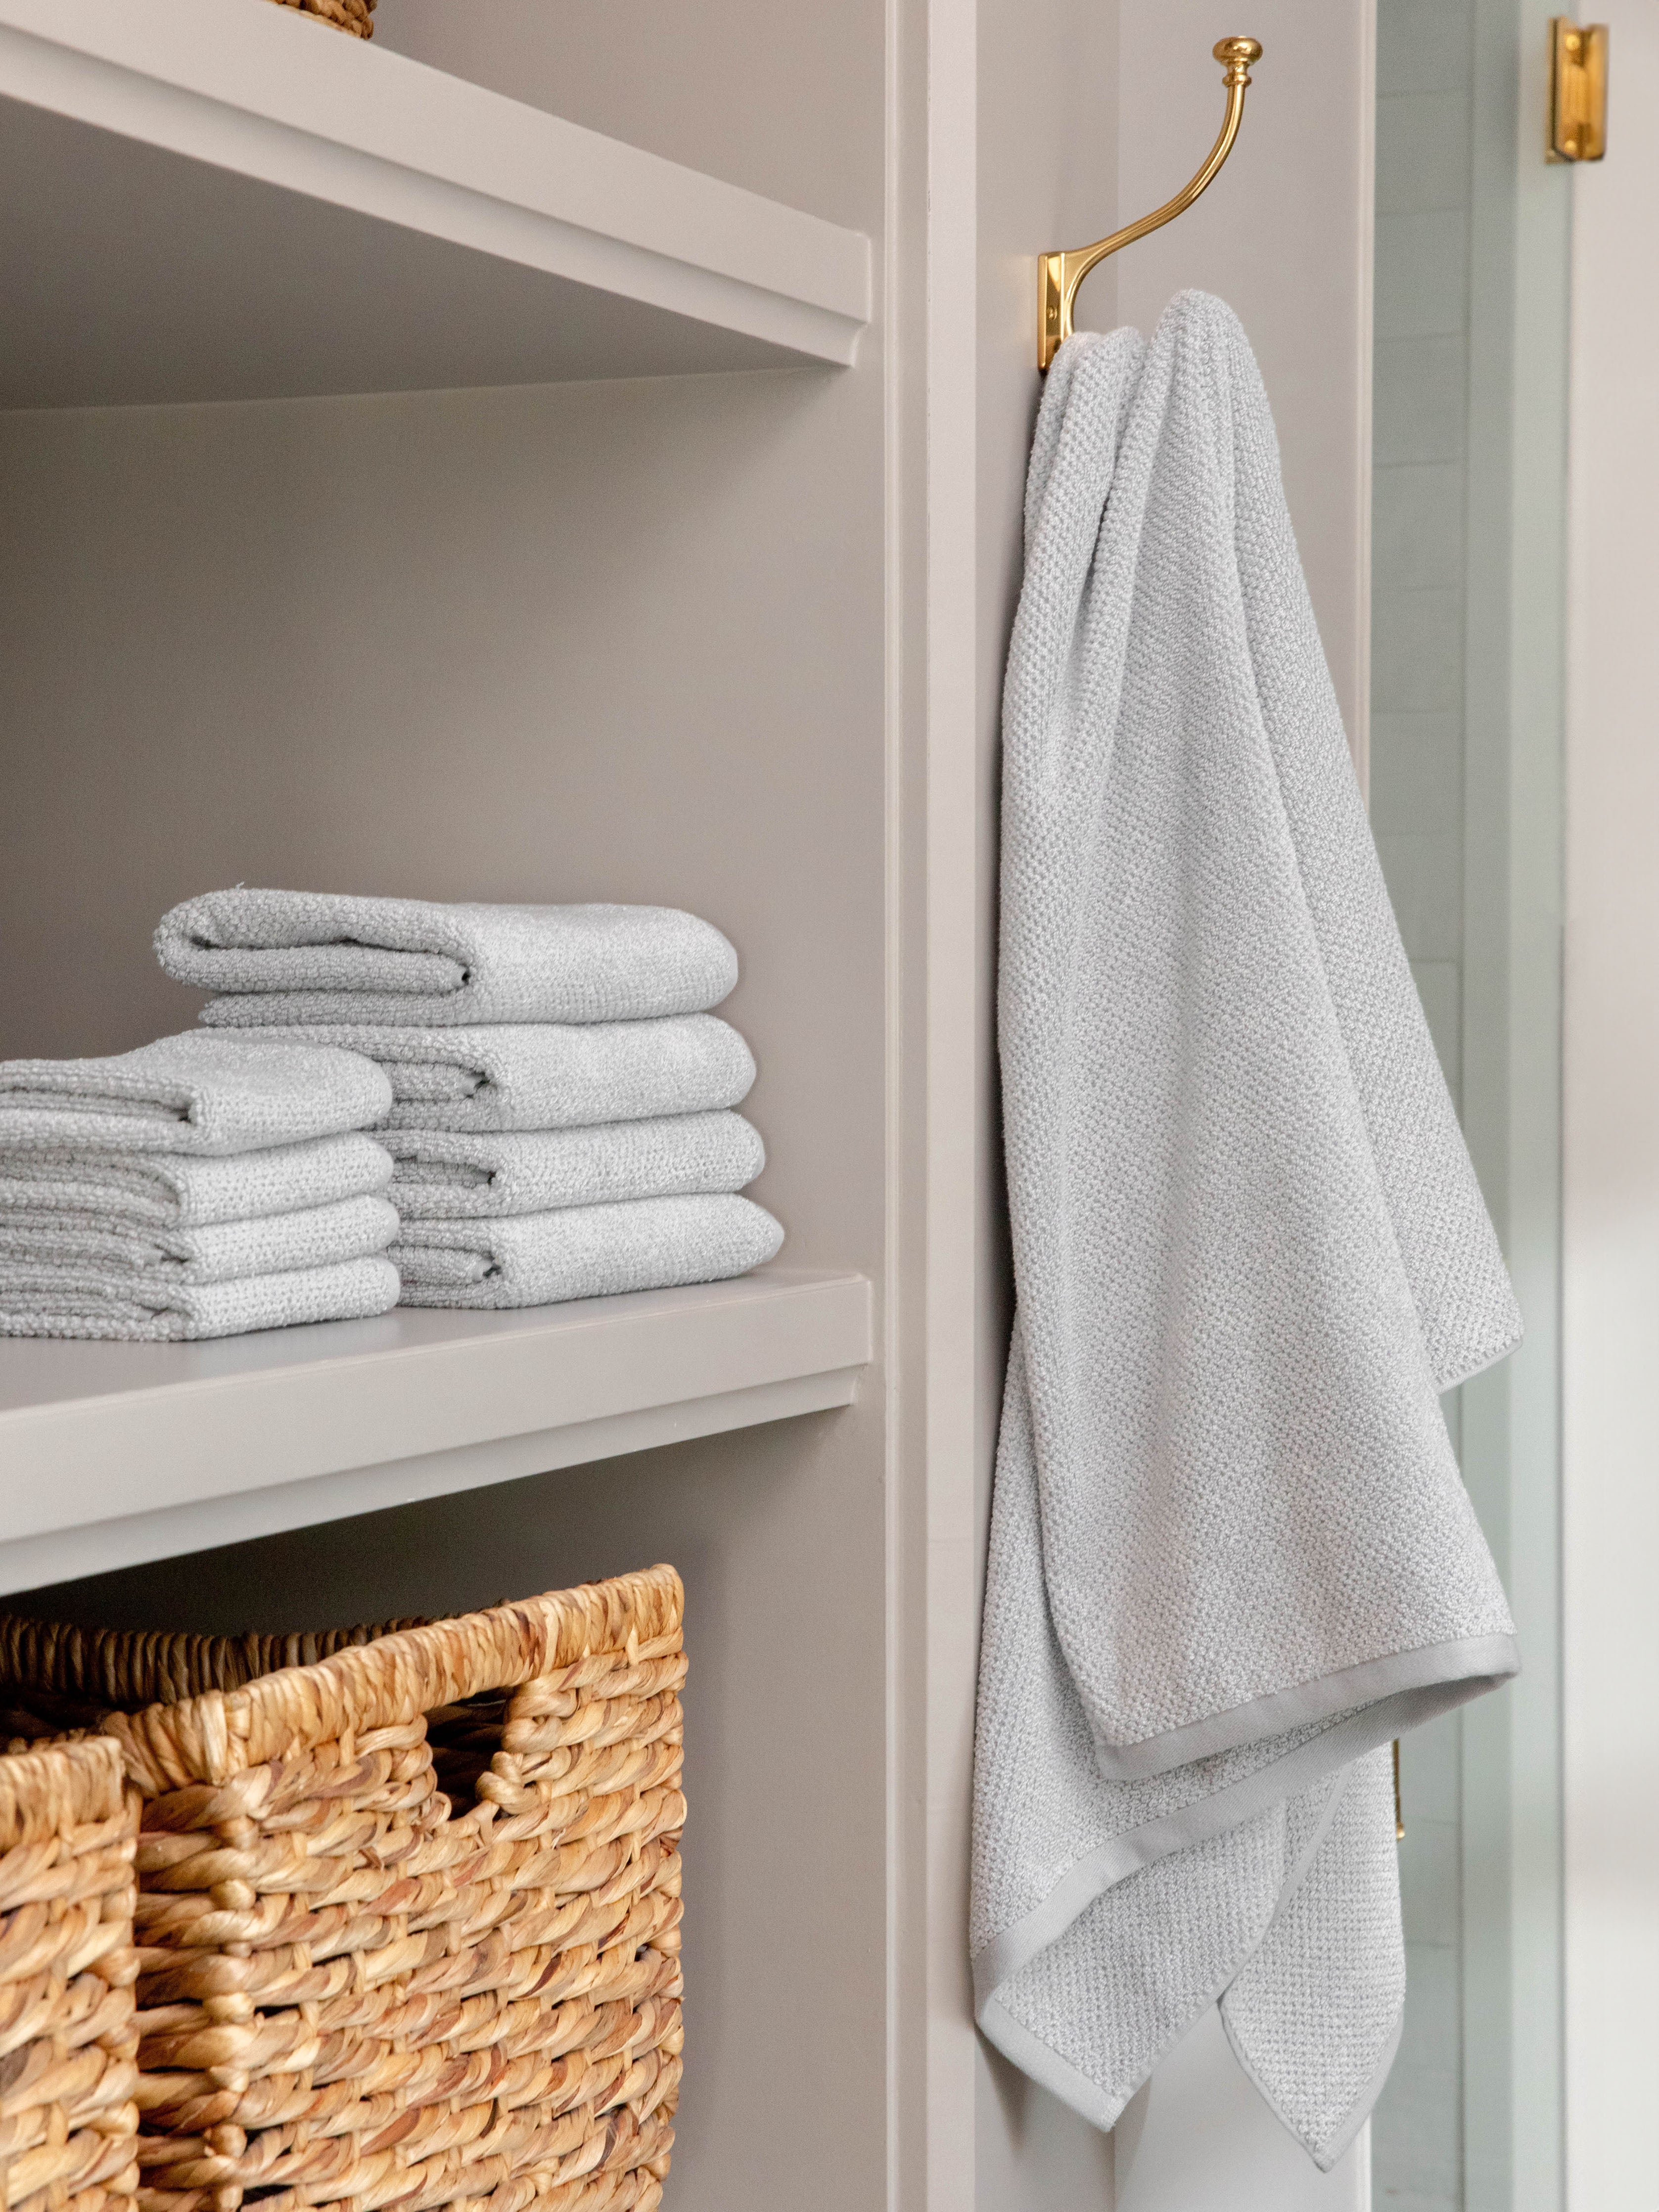 Complete Nantucket Bath Bundle in the color Heathered Harbor Mist. Photo of Complete Nantucket Bath Bundle taken as the hand towels, wash clothes, and bath towels are neatly placed on shelves in a bathroom. |Color: Heathered Harbor Mist